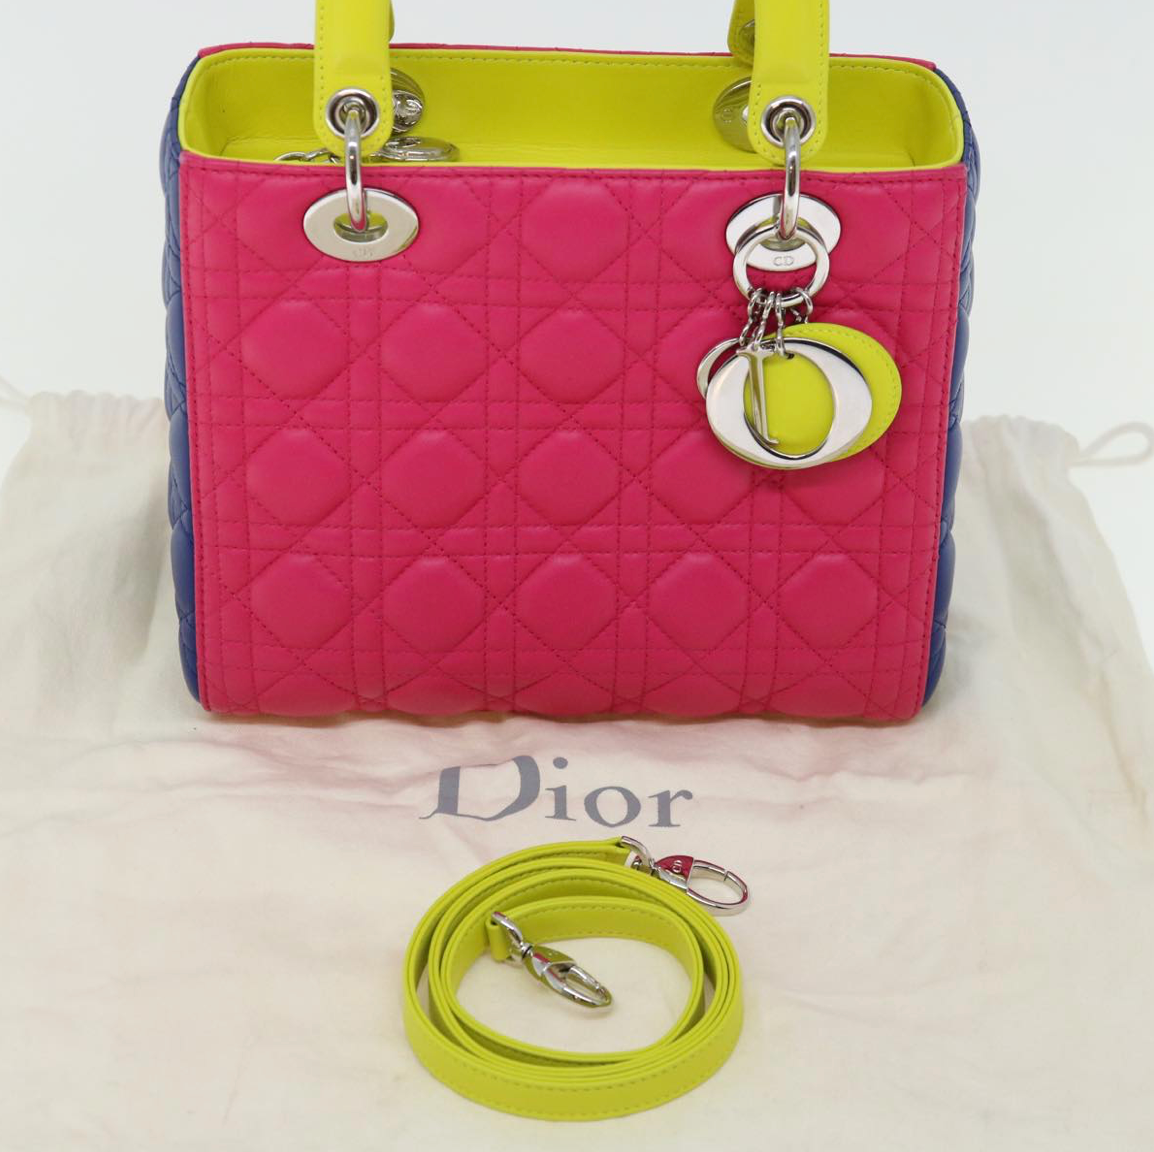 Pre-owned 2013 Lady Dior handbag crafted from multicoloured leather in pink, dark purple, and neon green cannage